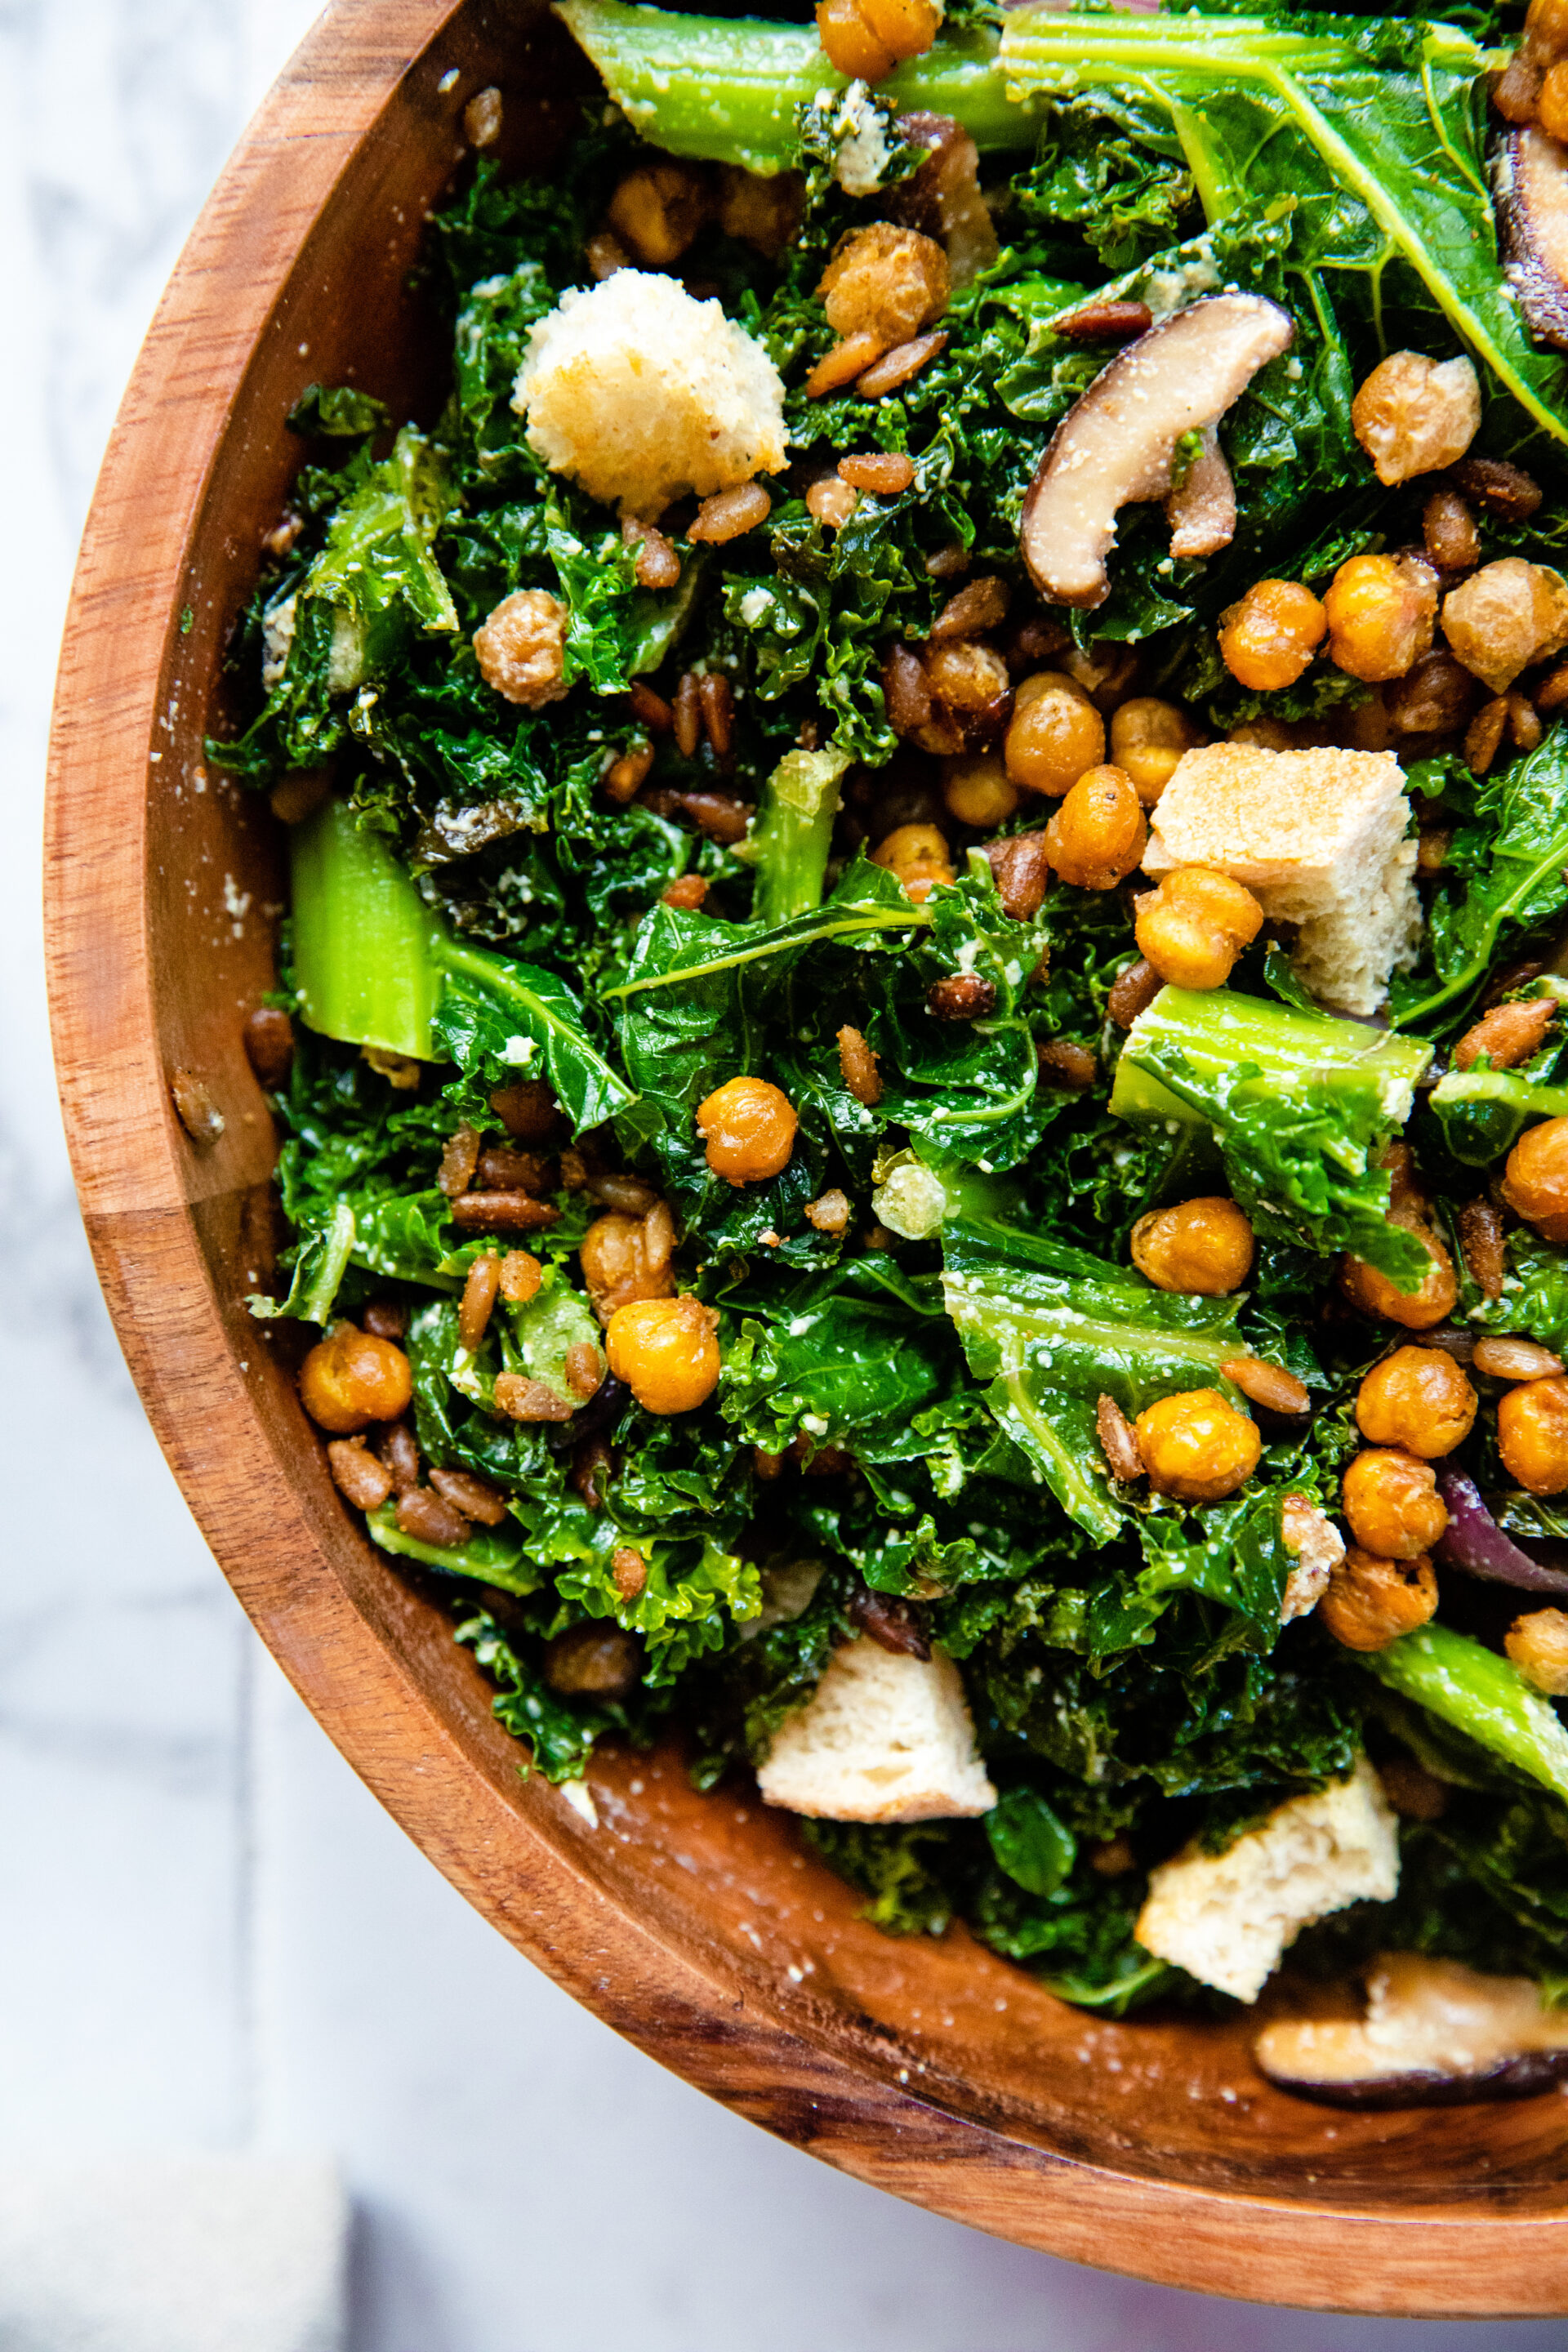 Warm Kale and Mushroom Salad + Creamy Dressing - Lettuce Bow and Say